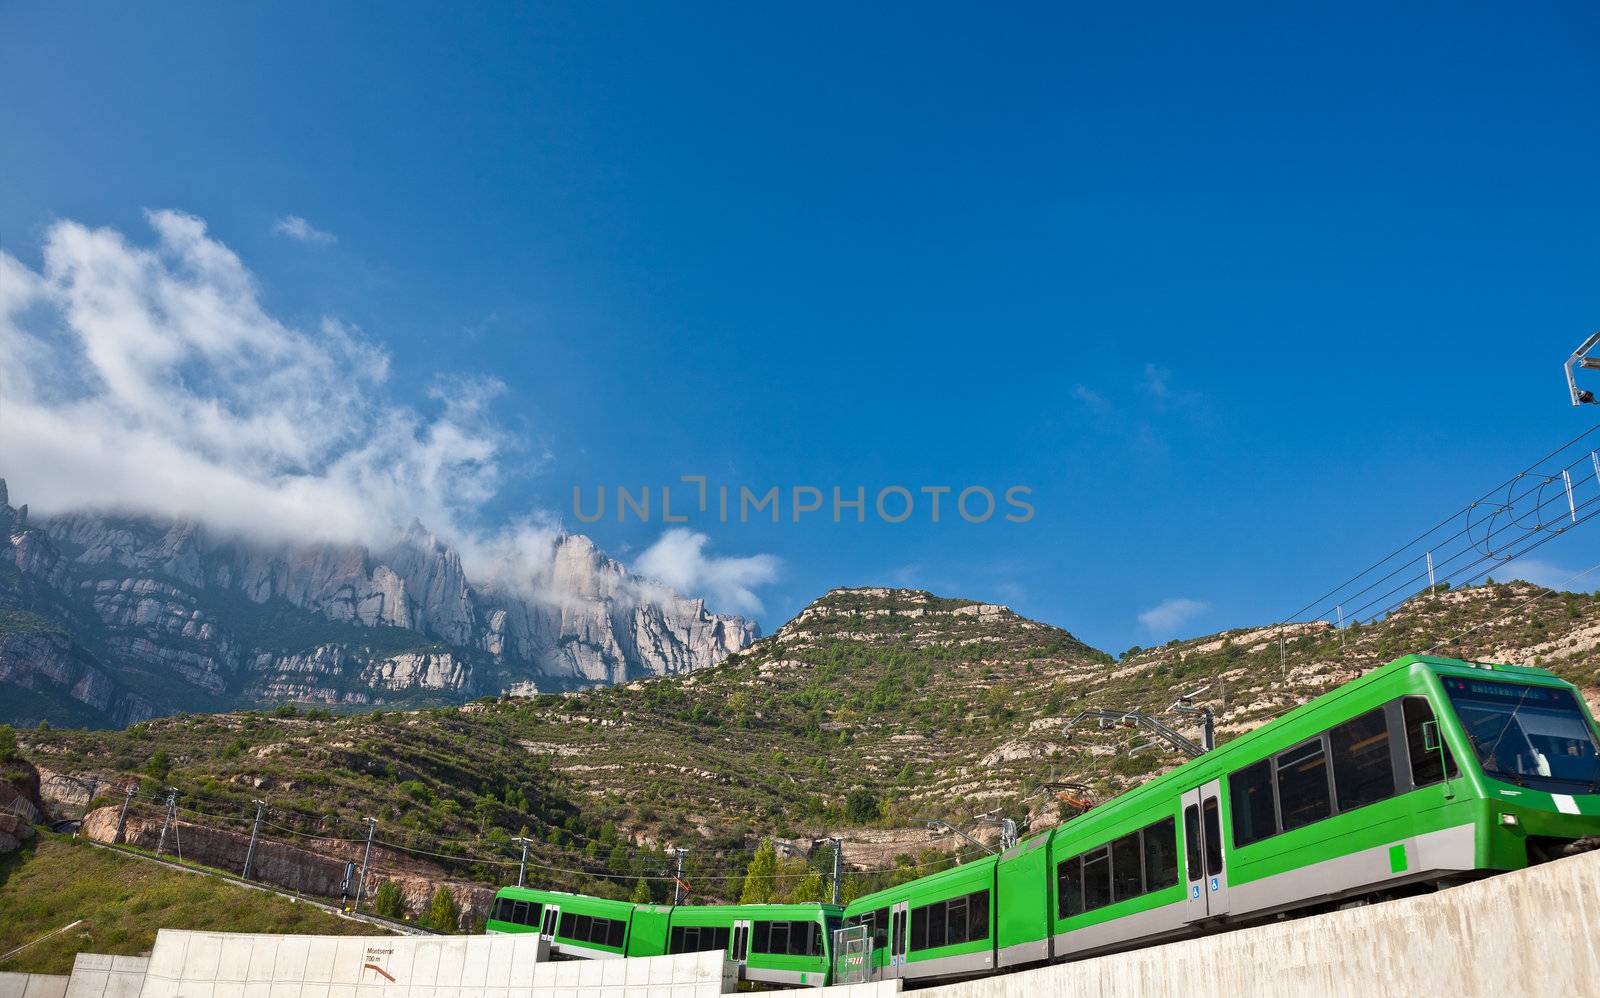 Famous Monserrat  mountains in Spain and  train